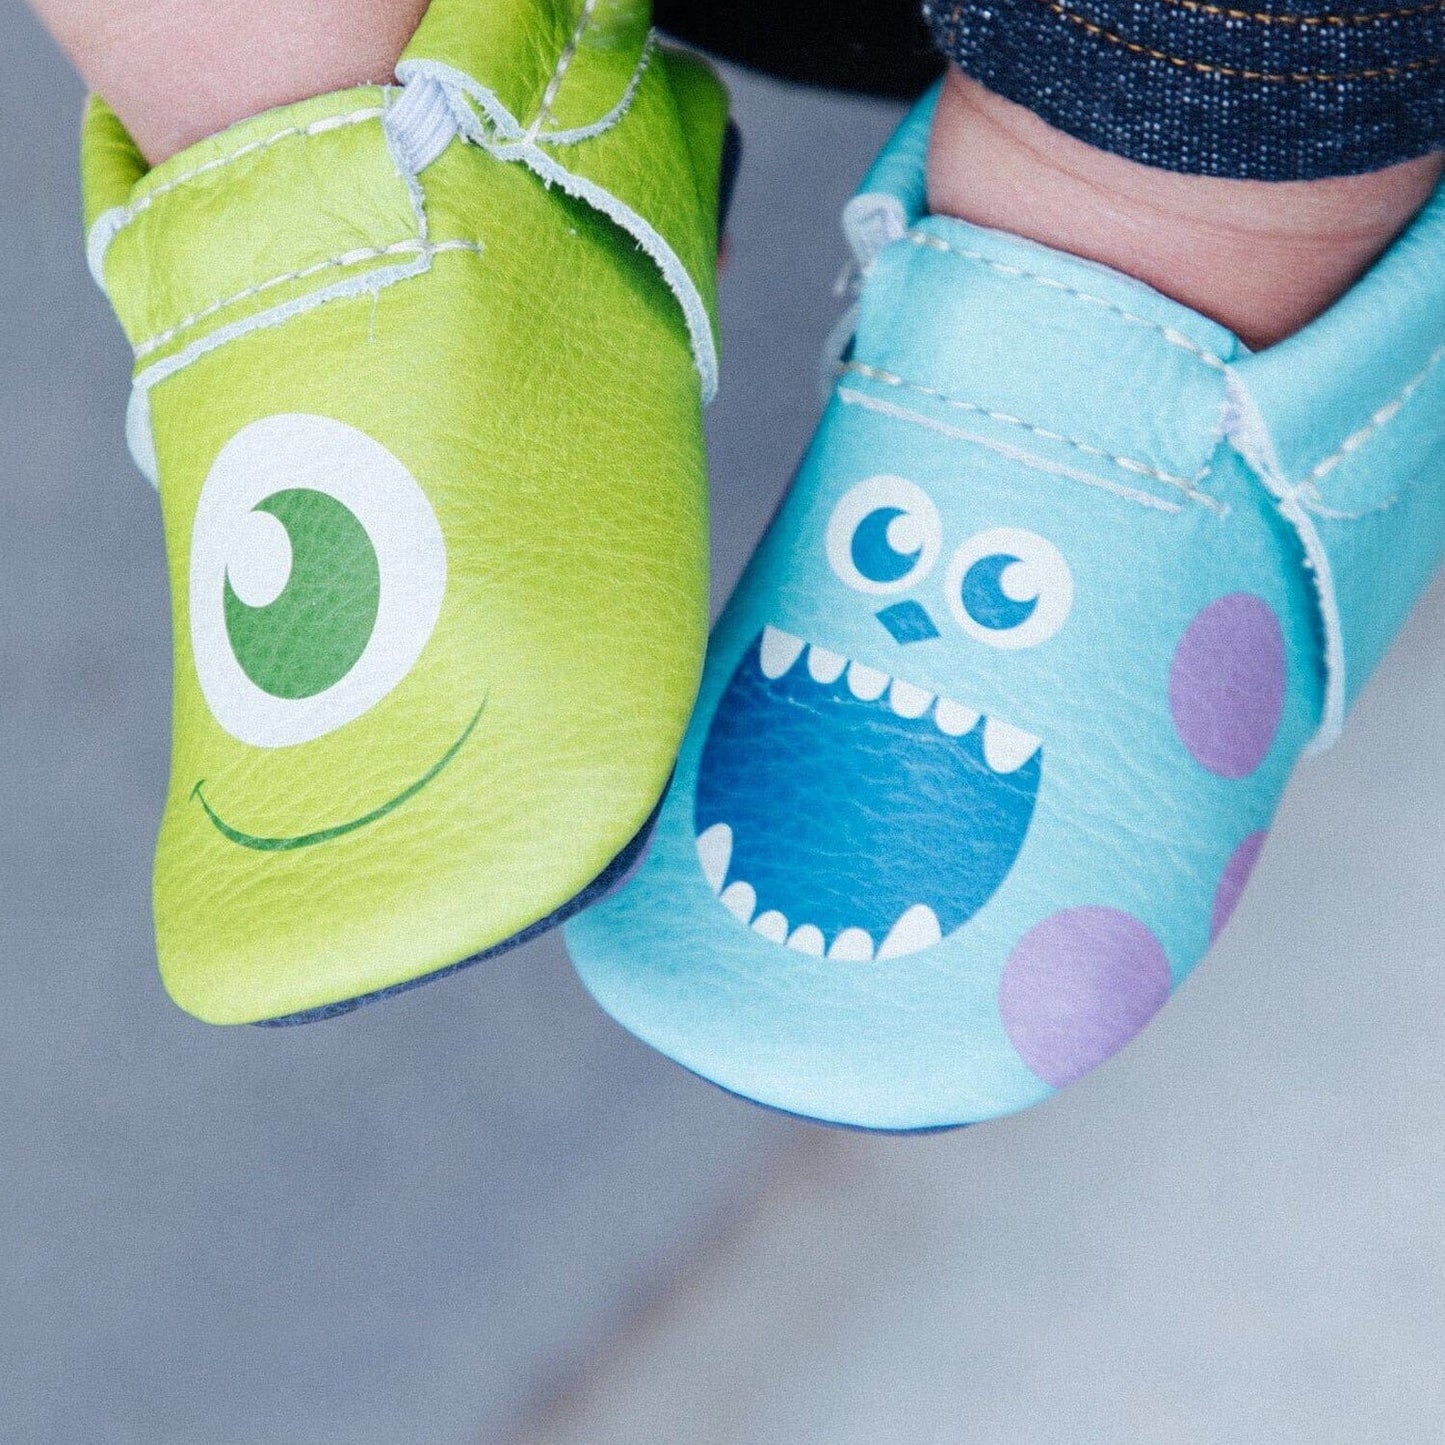 Mike and Sully City Mocc City Mocc Soft Sole 